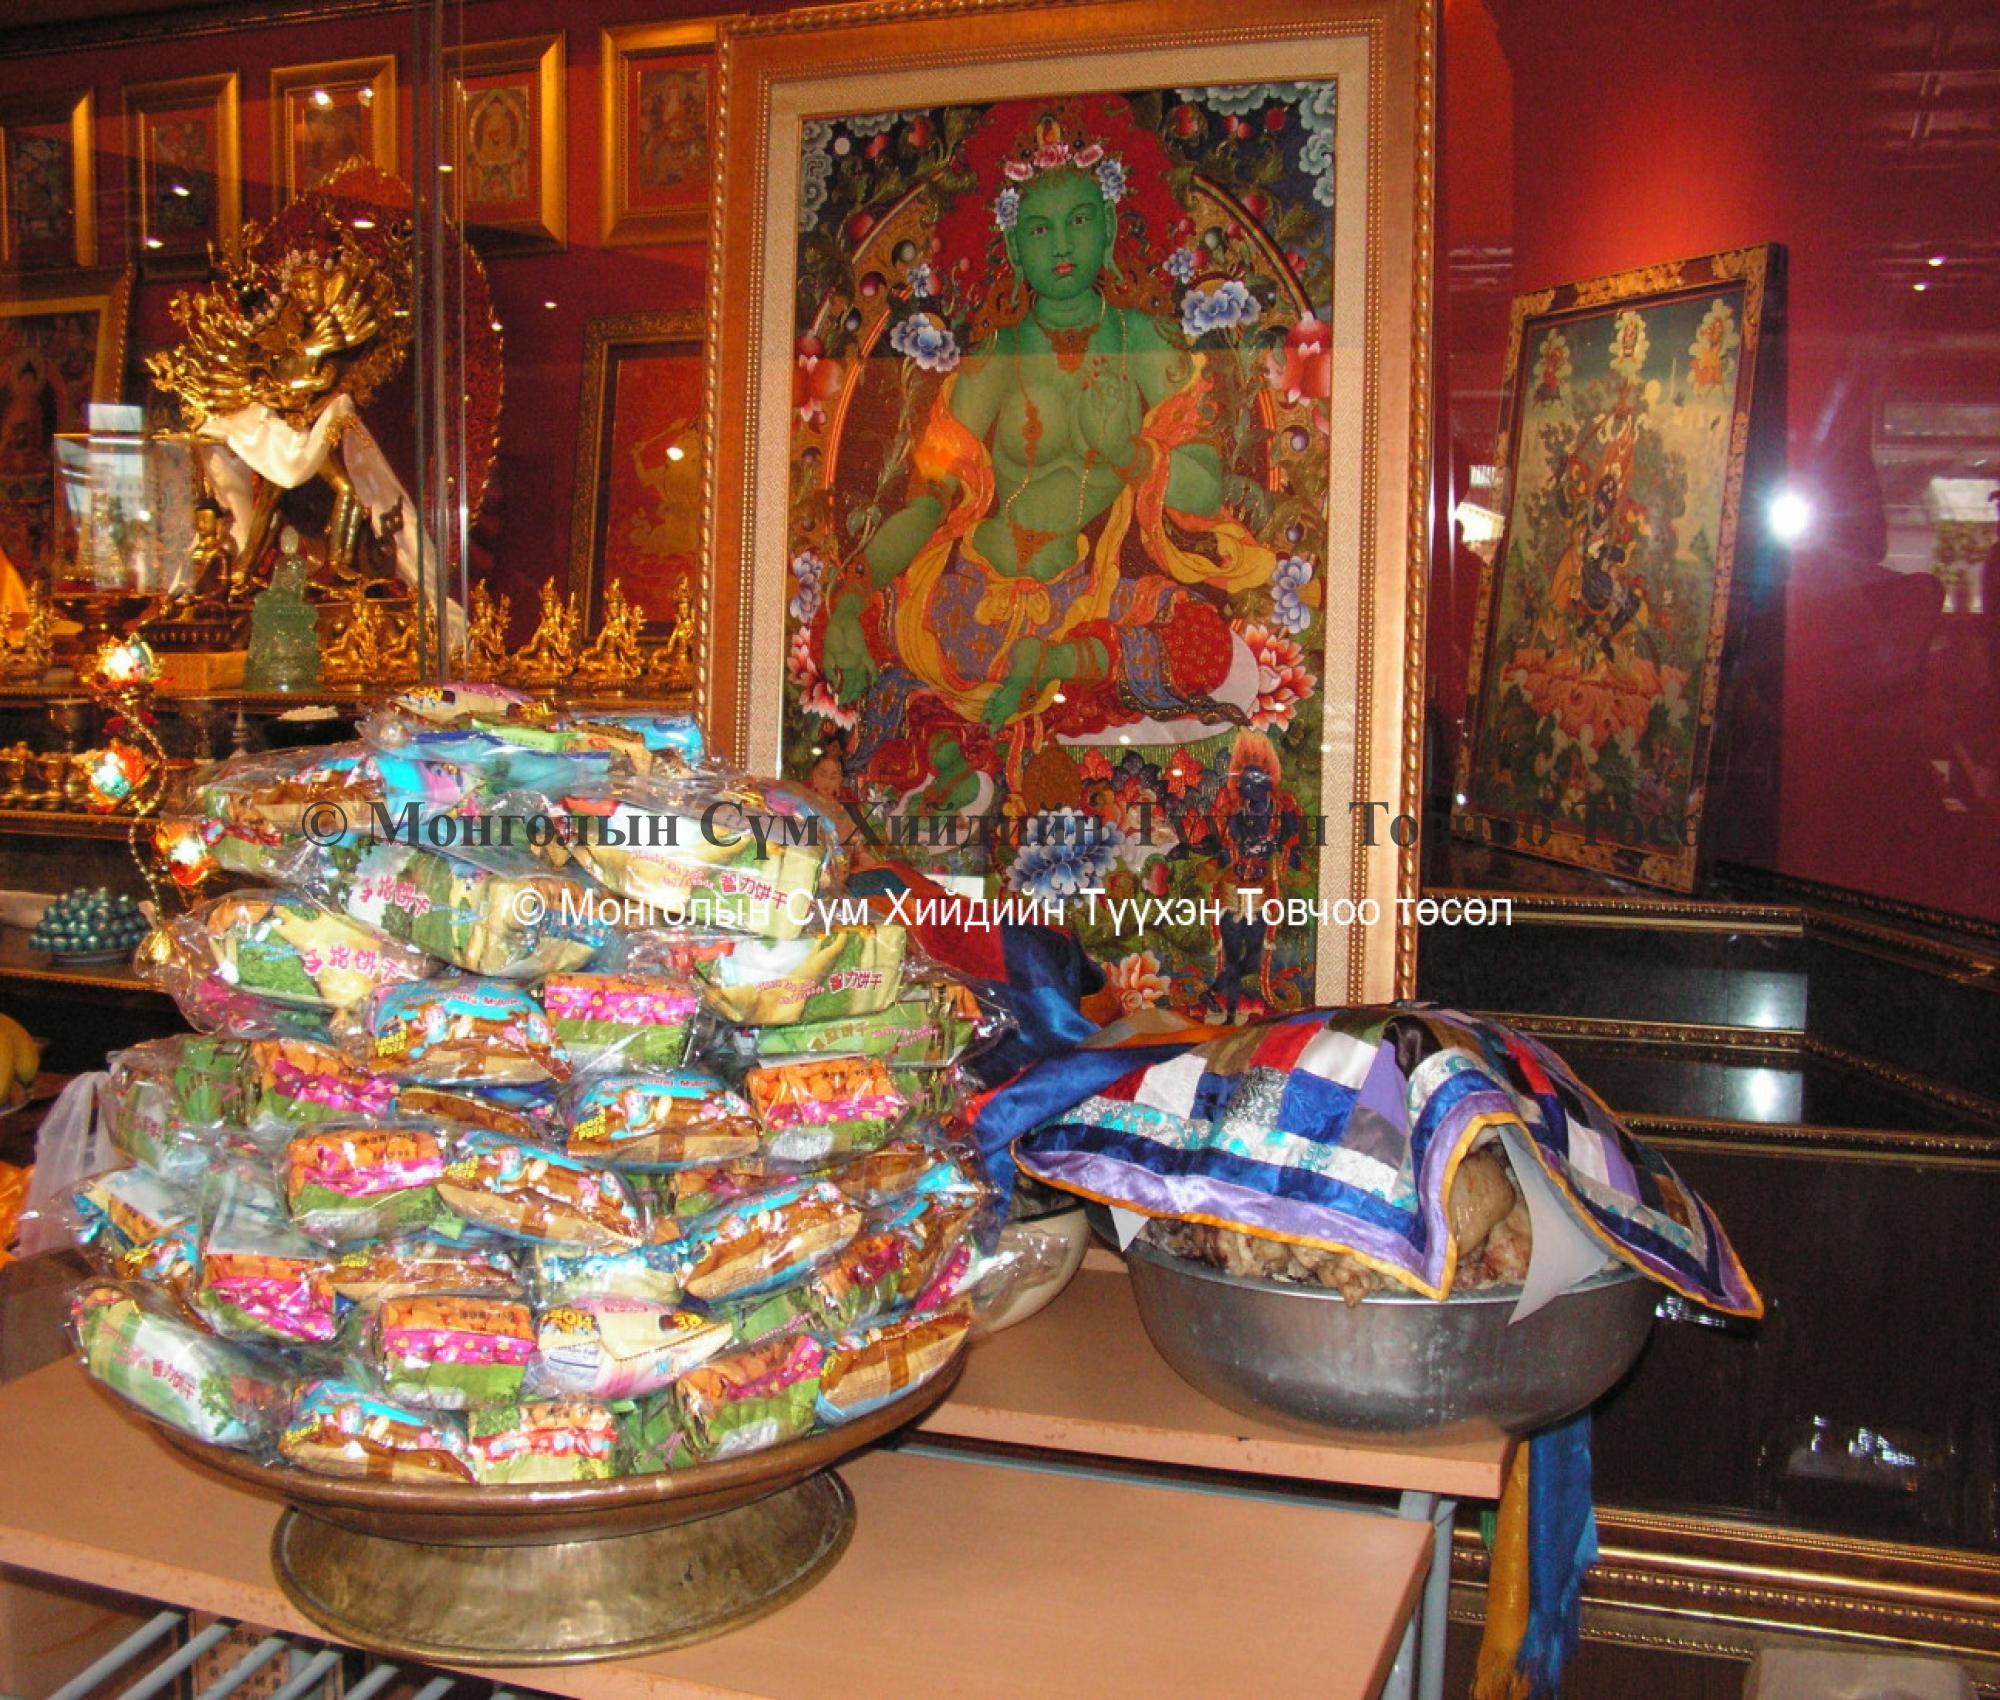 Offering on the altar in front of Green Tara